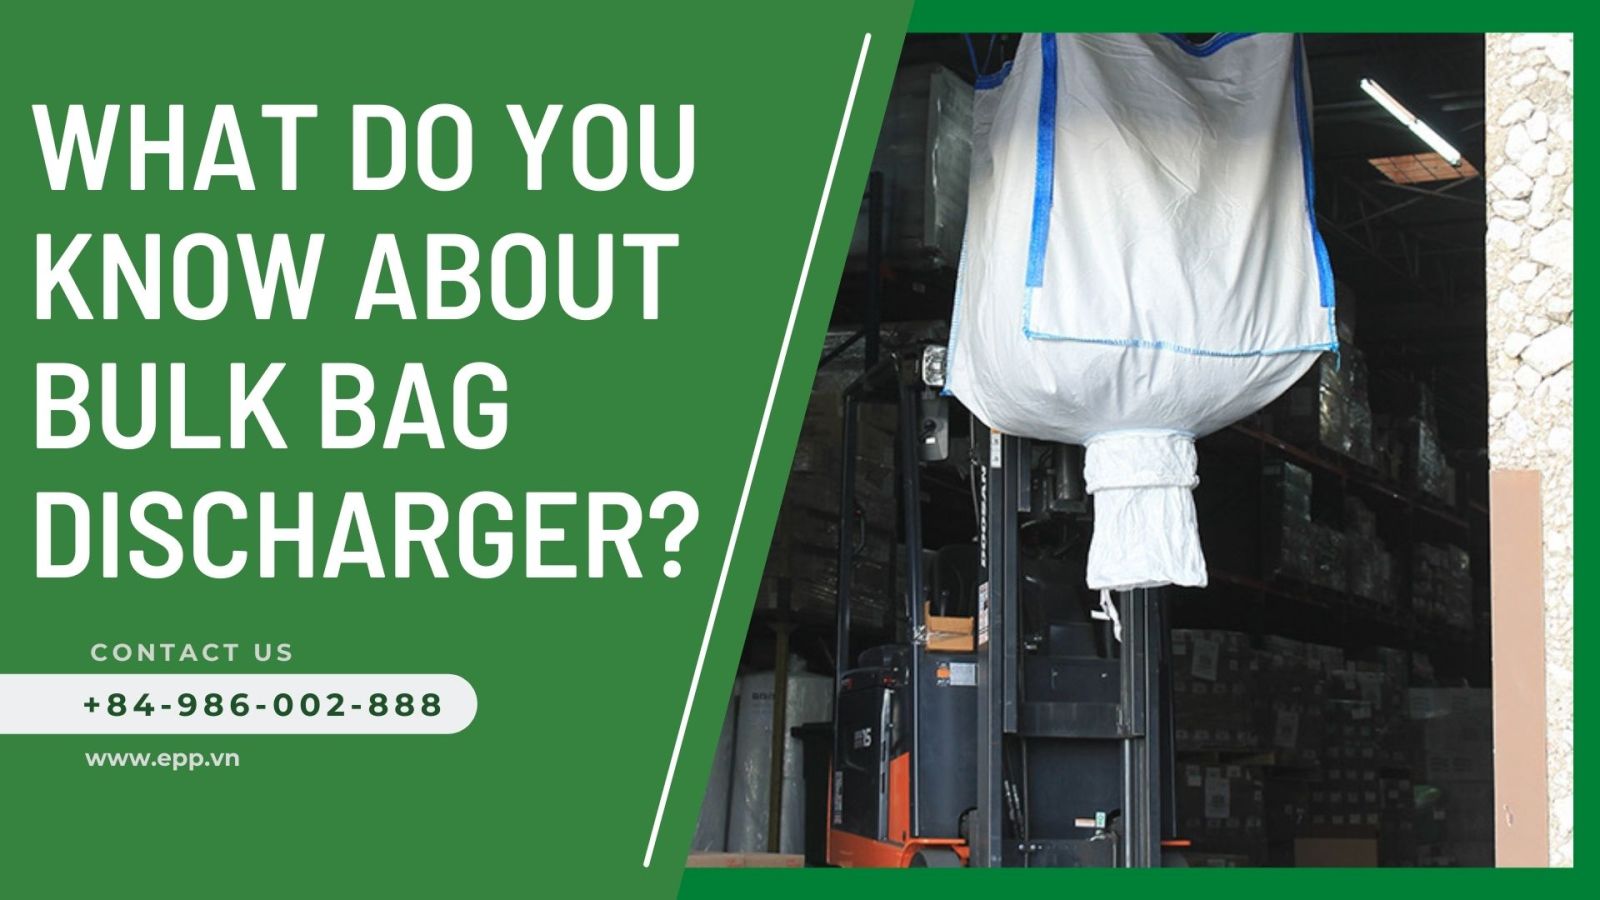 What-do-you-know-about-bulk-bag-discharger.jpg